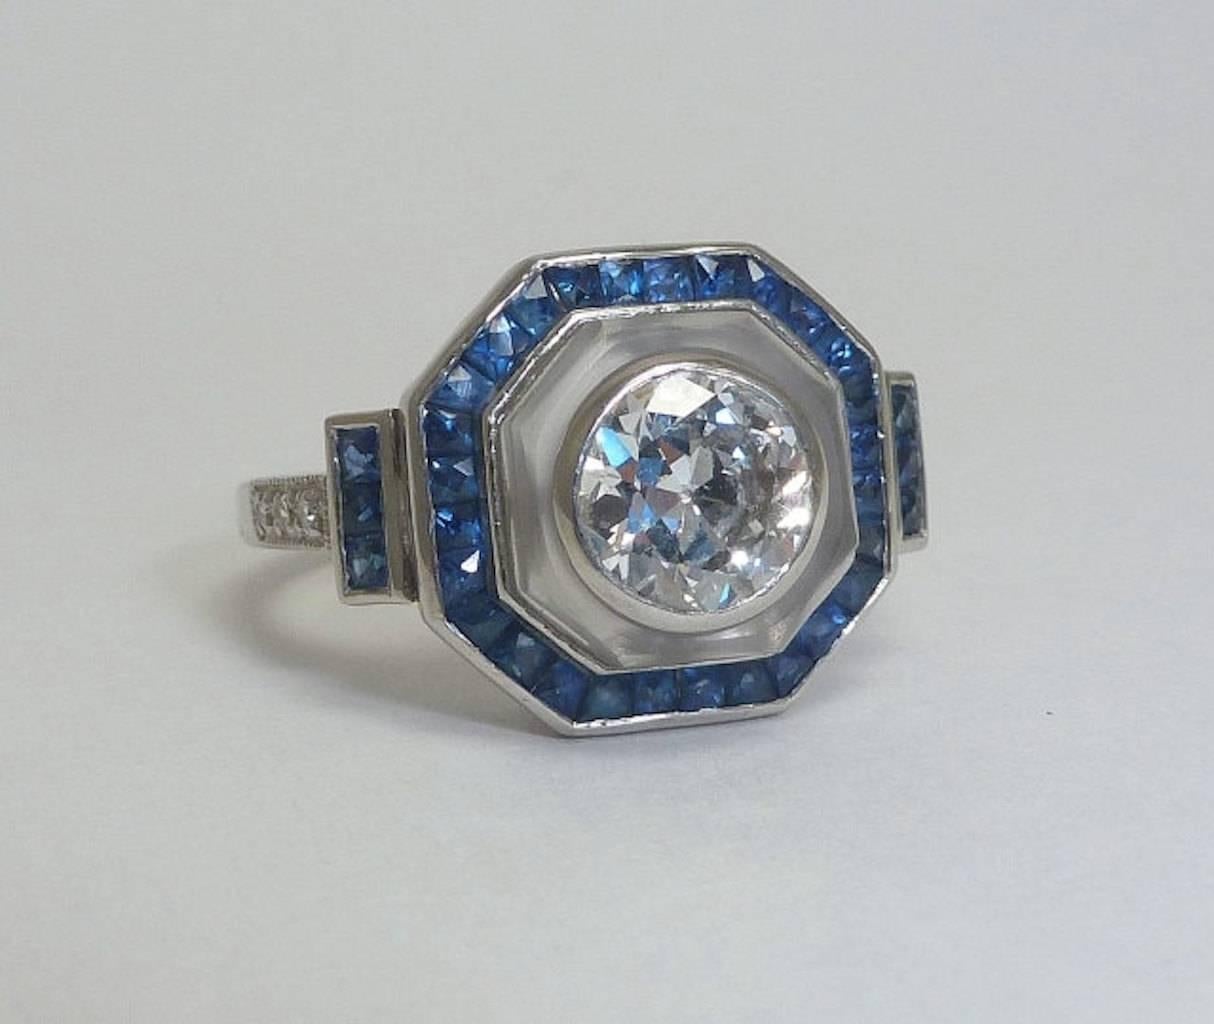 A beautiful sapphire and diamond engagement ring in luxurious platinum. Featuring a center bezel set old European cut diamond framed by frosted rock crystal and French cut sapphires this ring is truly a spectacular and unique engagement ring of the